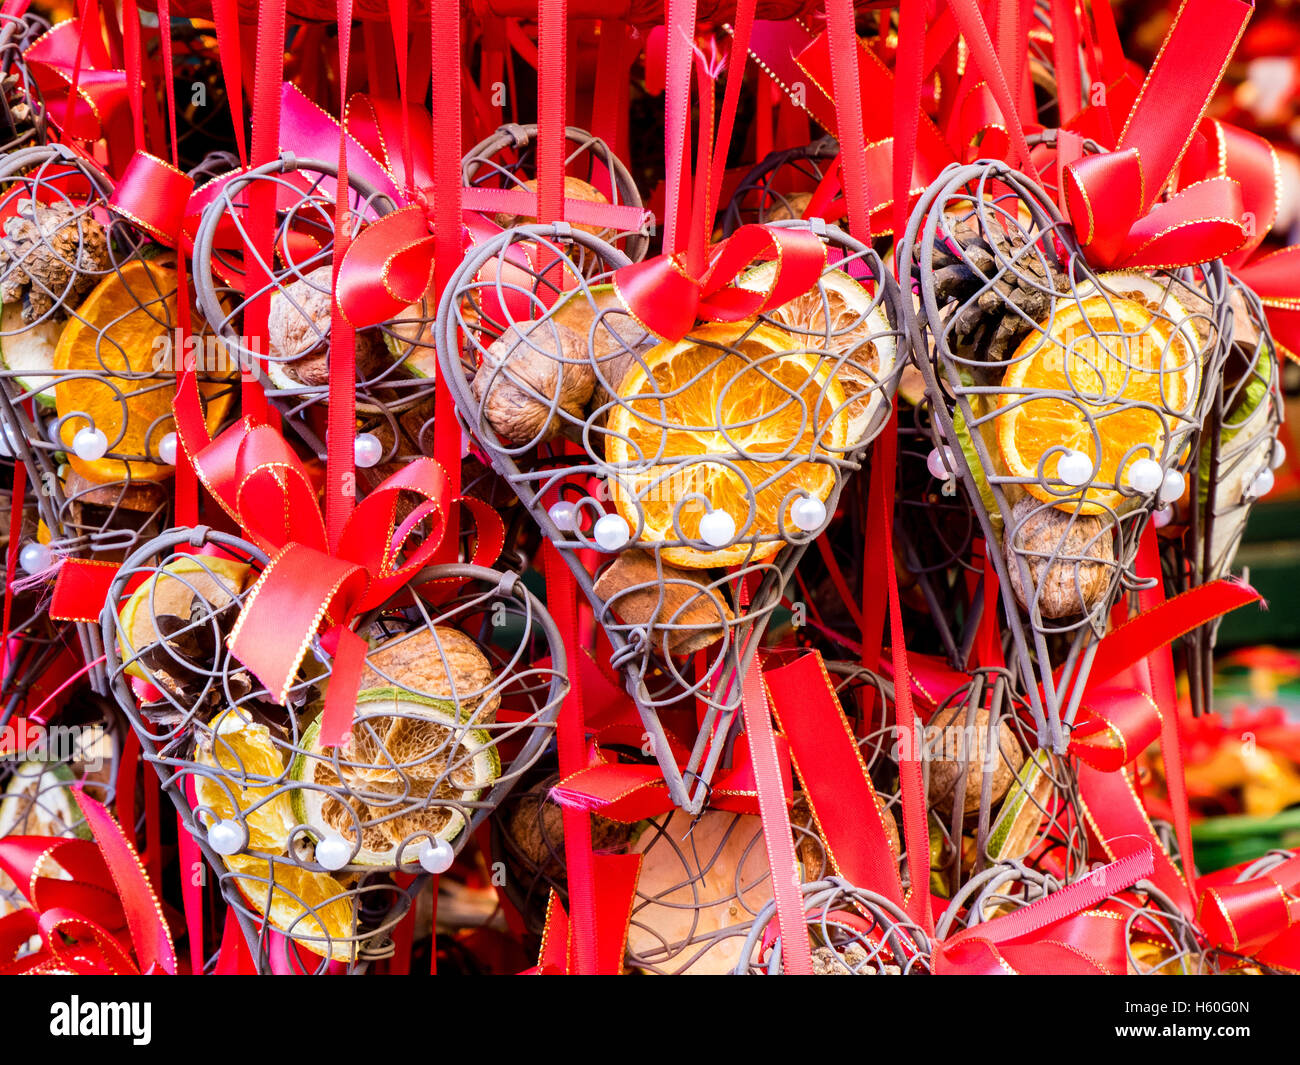 Many gifts hanged in a market stall of a Christmas little market in Austria, decorated with dried fruits. Stock Photo